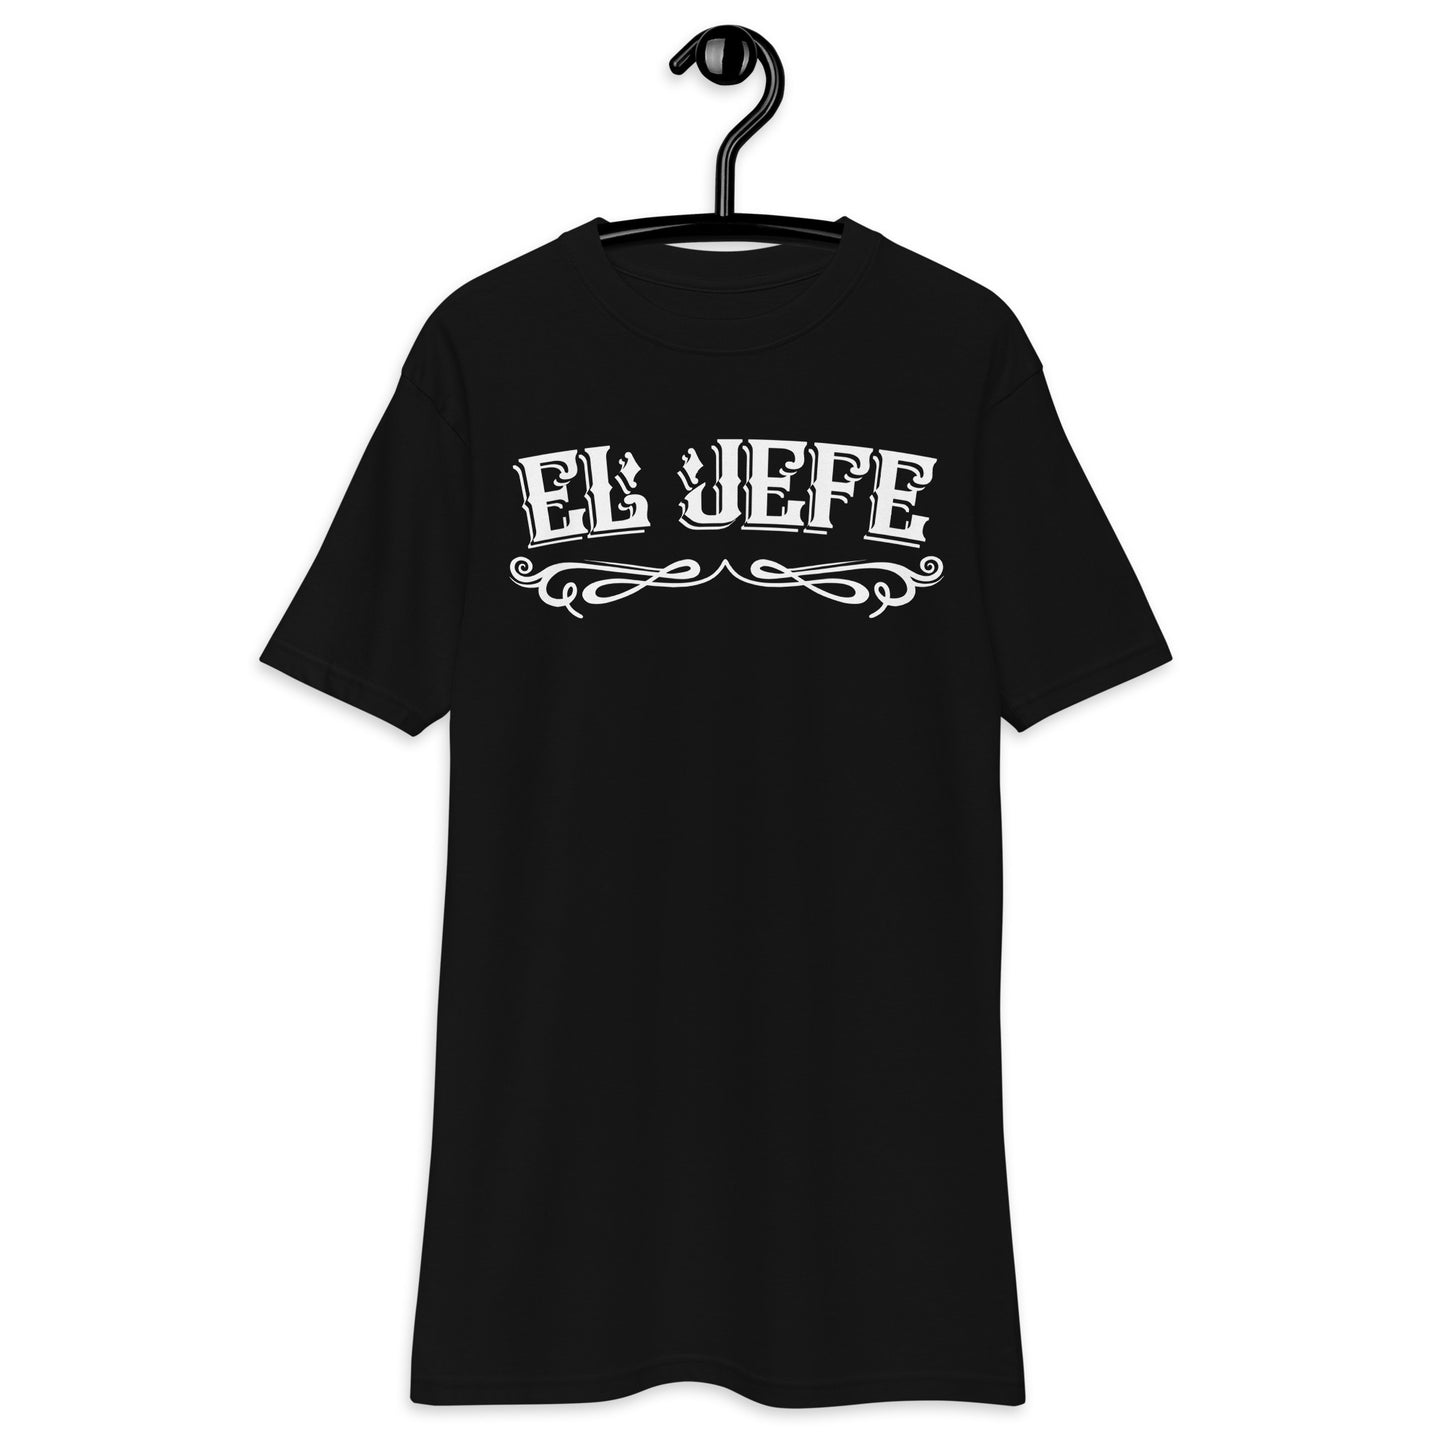 Front view of black "El Jefe" T-shirt featuring classic Chicano text design.